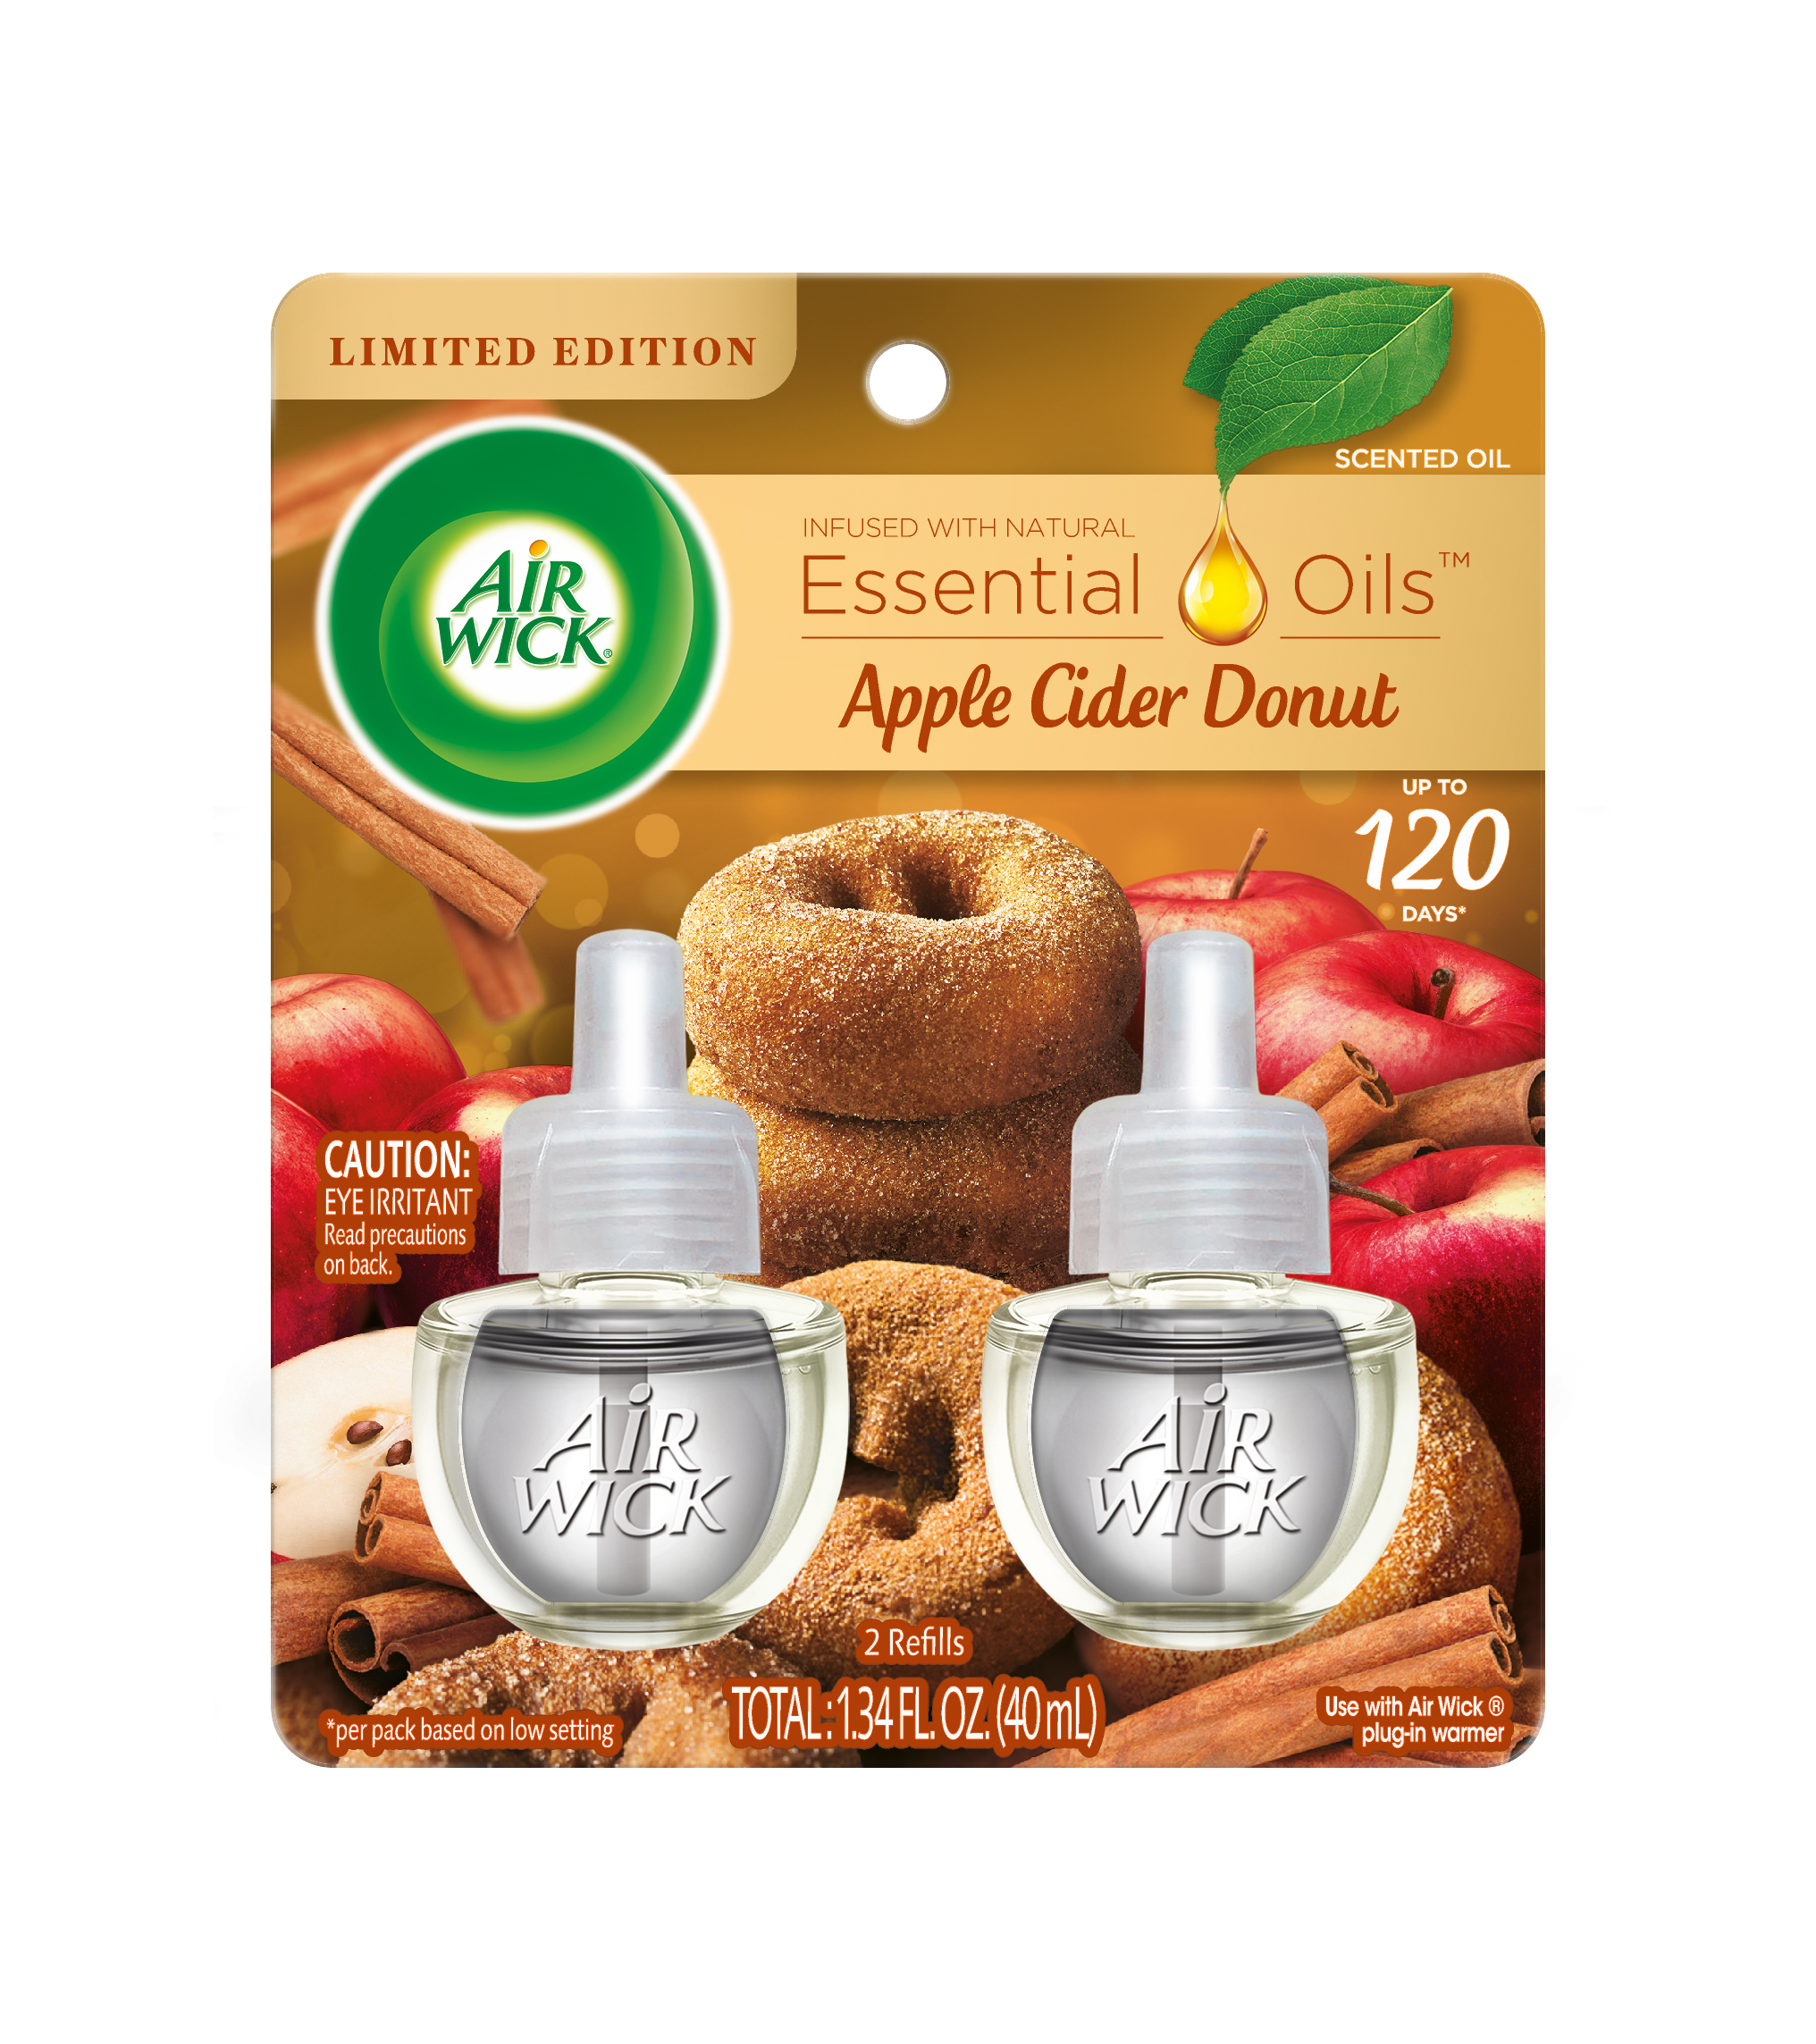 AIR WICK® Scented Oil - Apple Cider Donut